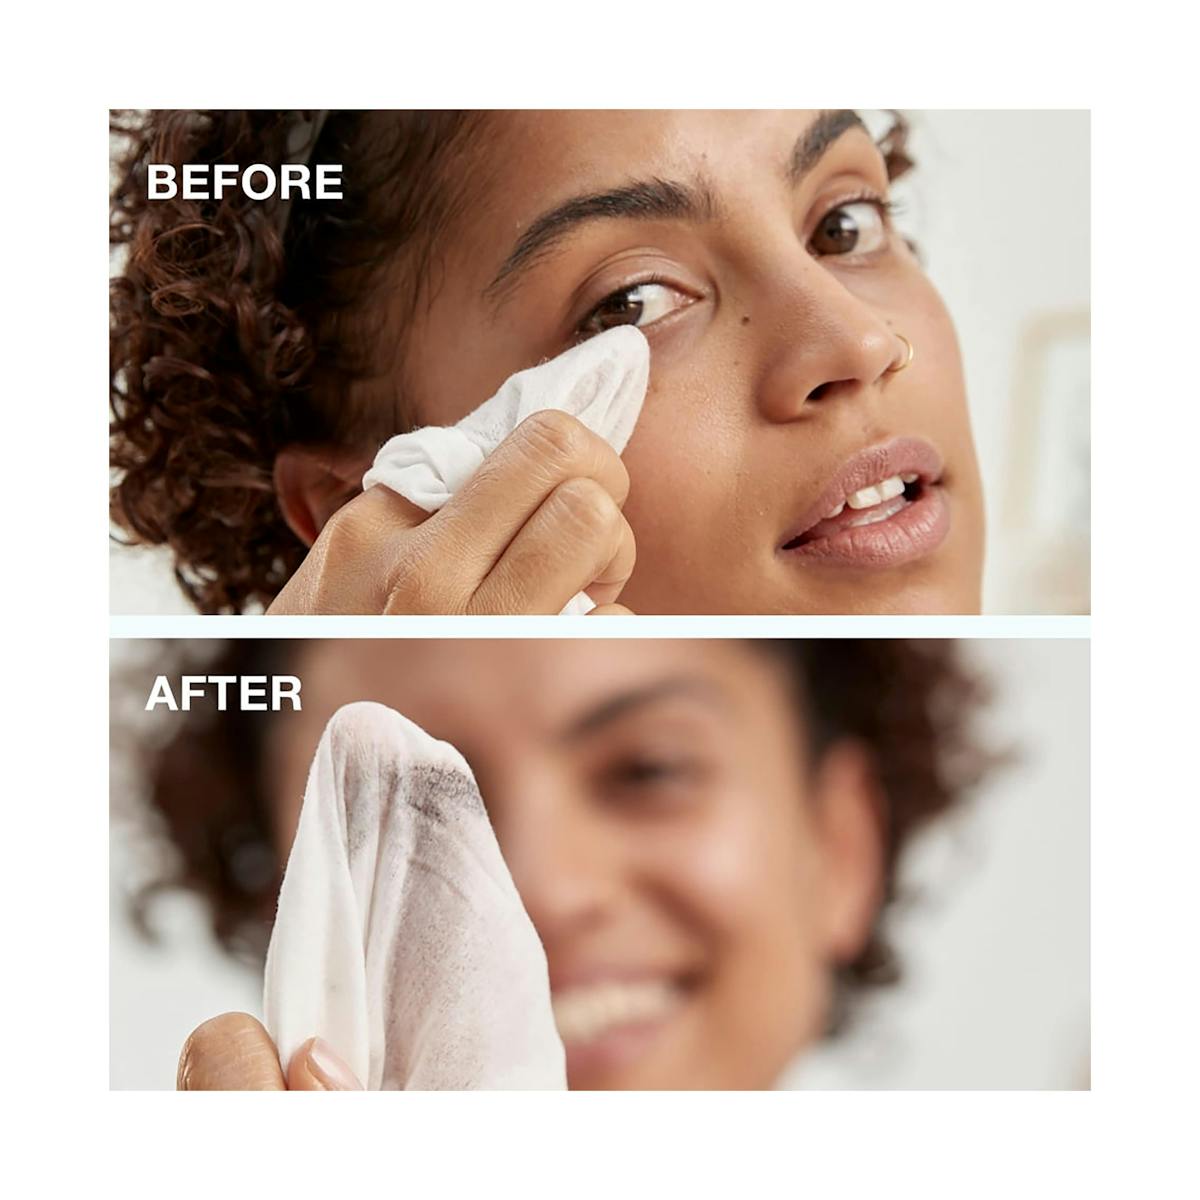 We Tried It: Does the Makeup Remover Towel Really Work?